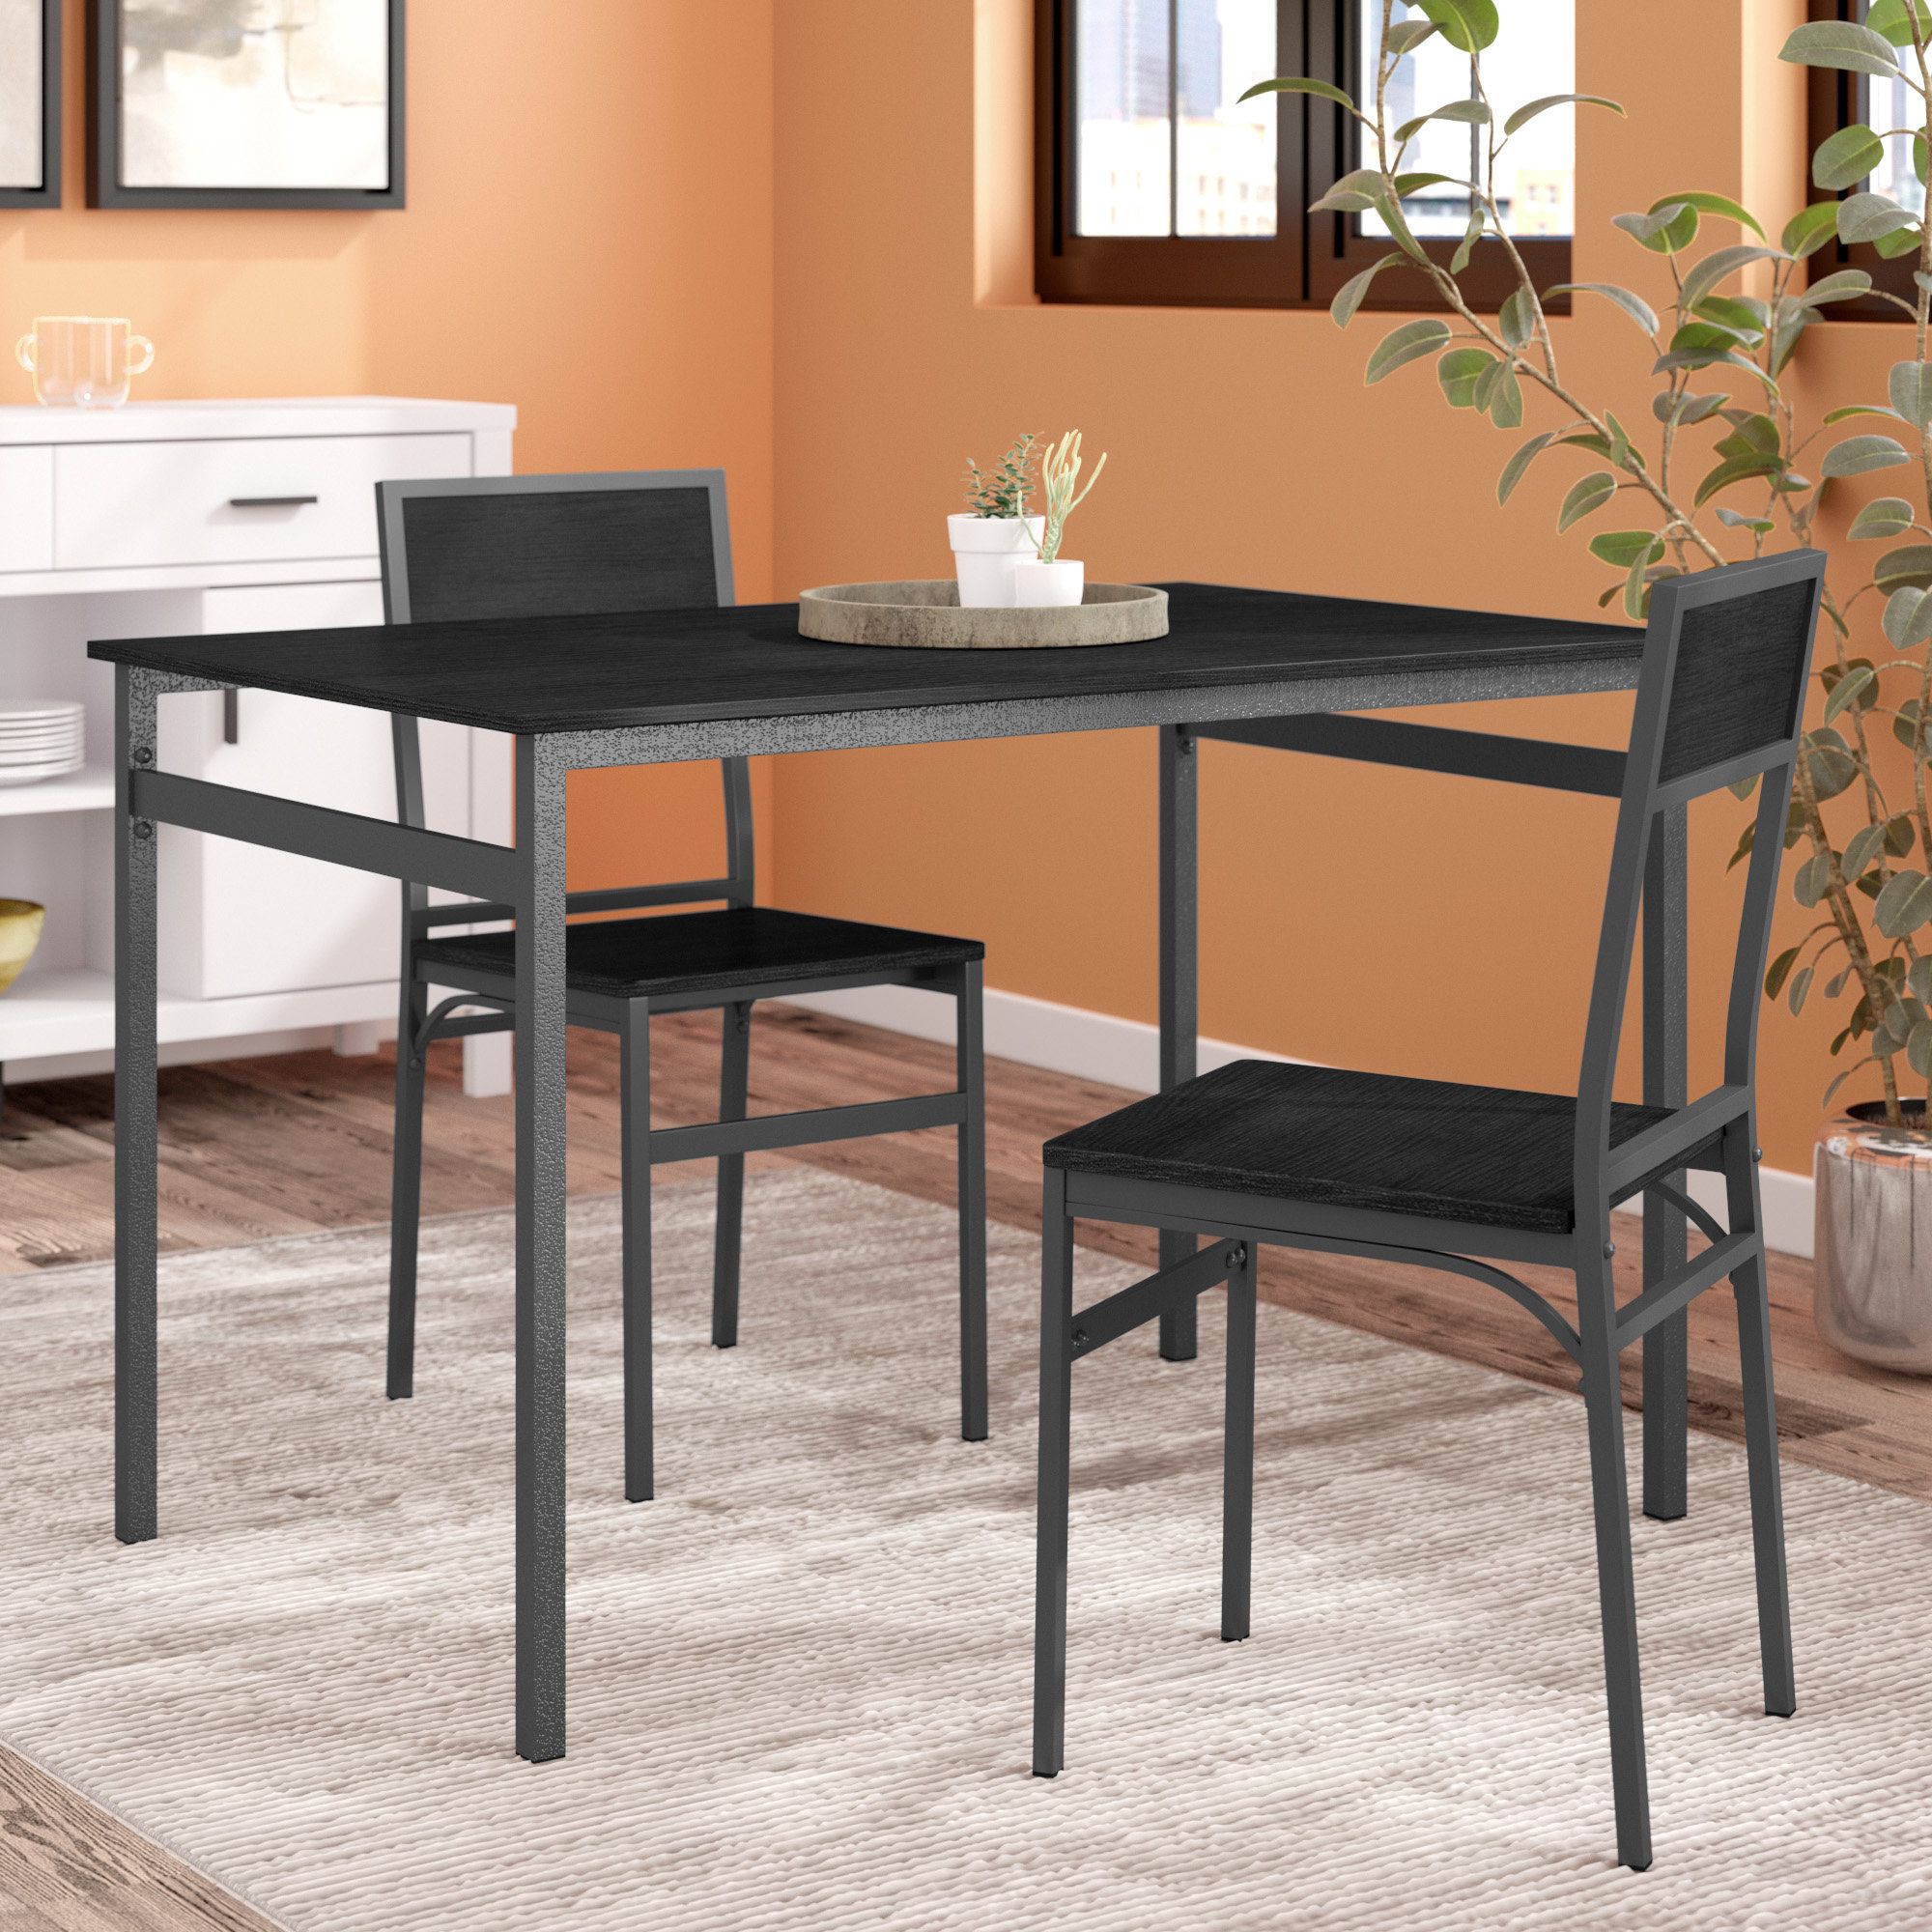 Springfield 3 Piece Dining Sets Throughout Famous Latitude Run Springfield 3 Piece Dining Set & Reviews (Photo 1 of 25)